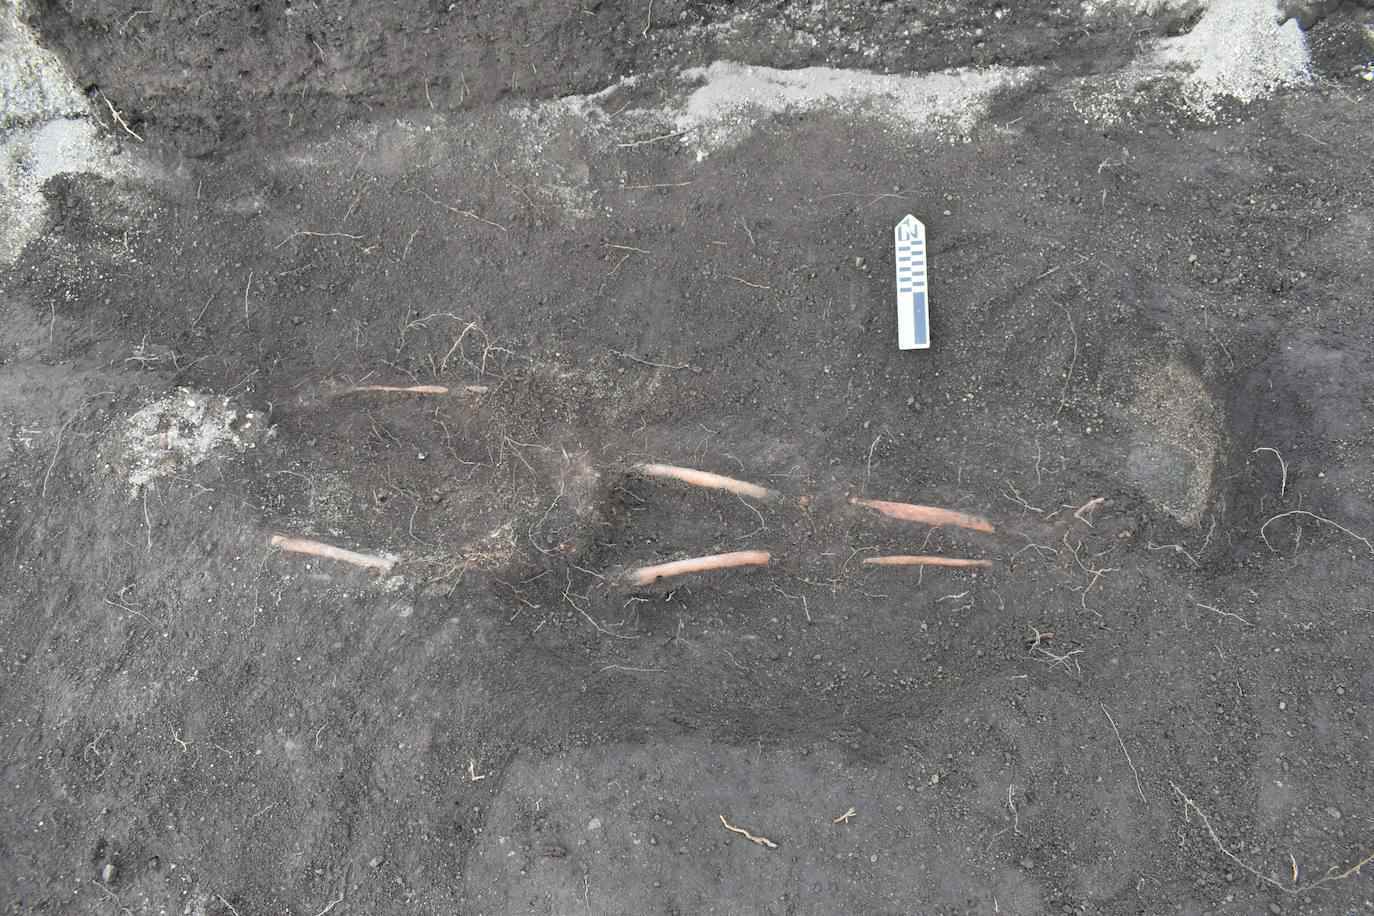 The remains, dating back five centuries, were found in Mulaló, one of the ten rural parishes of the Latacunga canton, at an altitude of 2,900 meters (EFE / Byron Ortiz / Mulaló Archaeological Project - Salatilín).